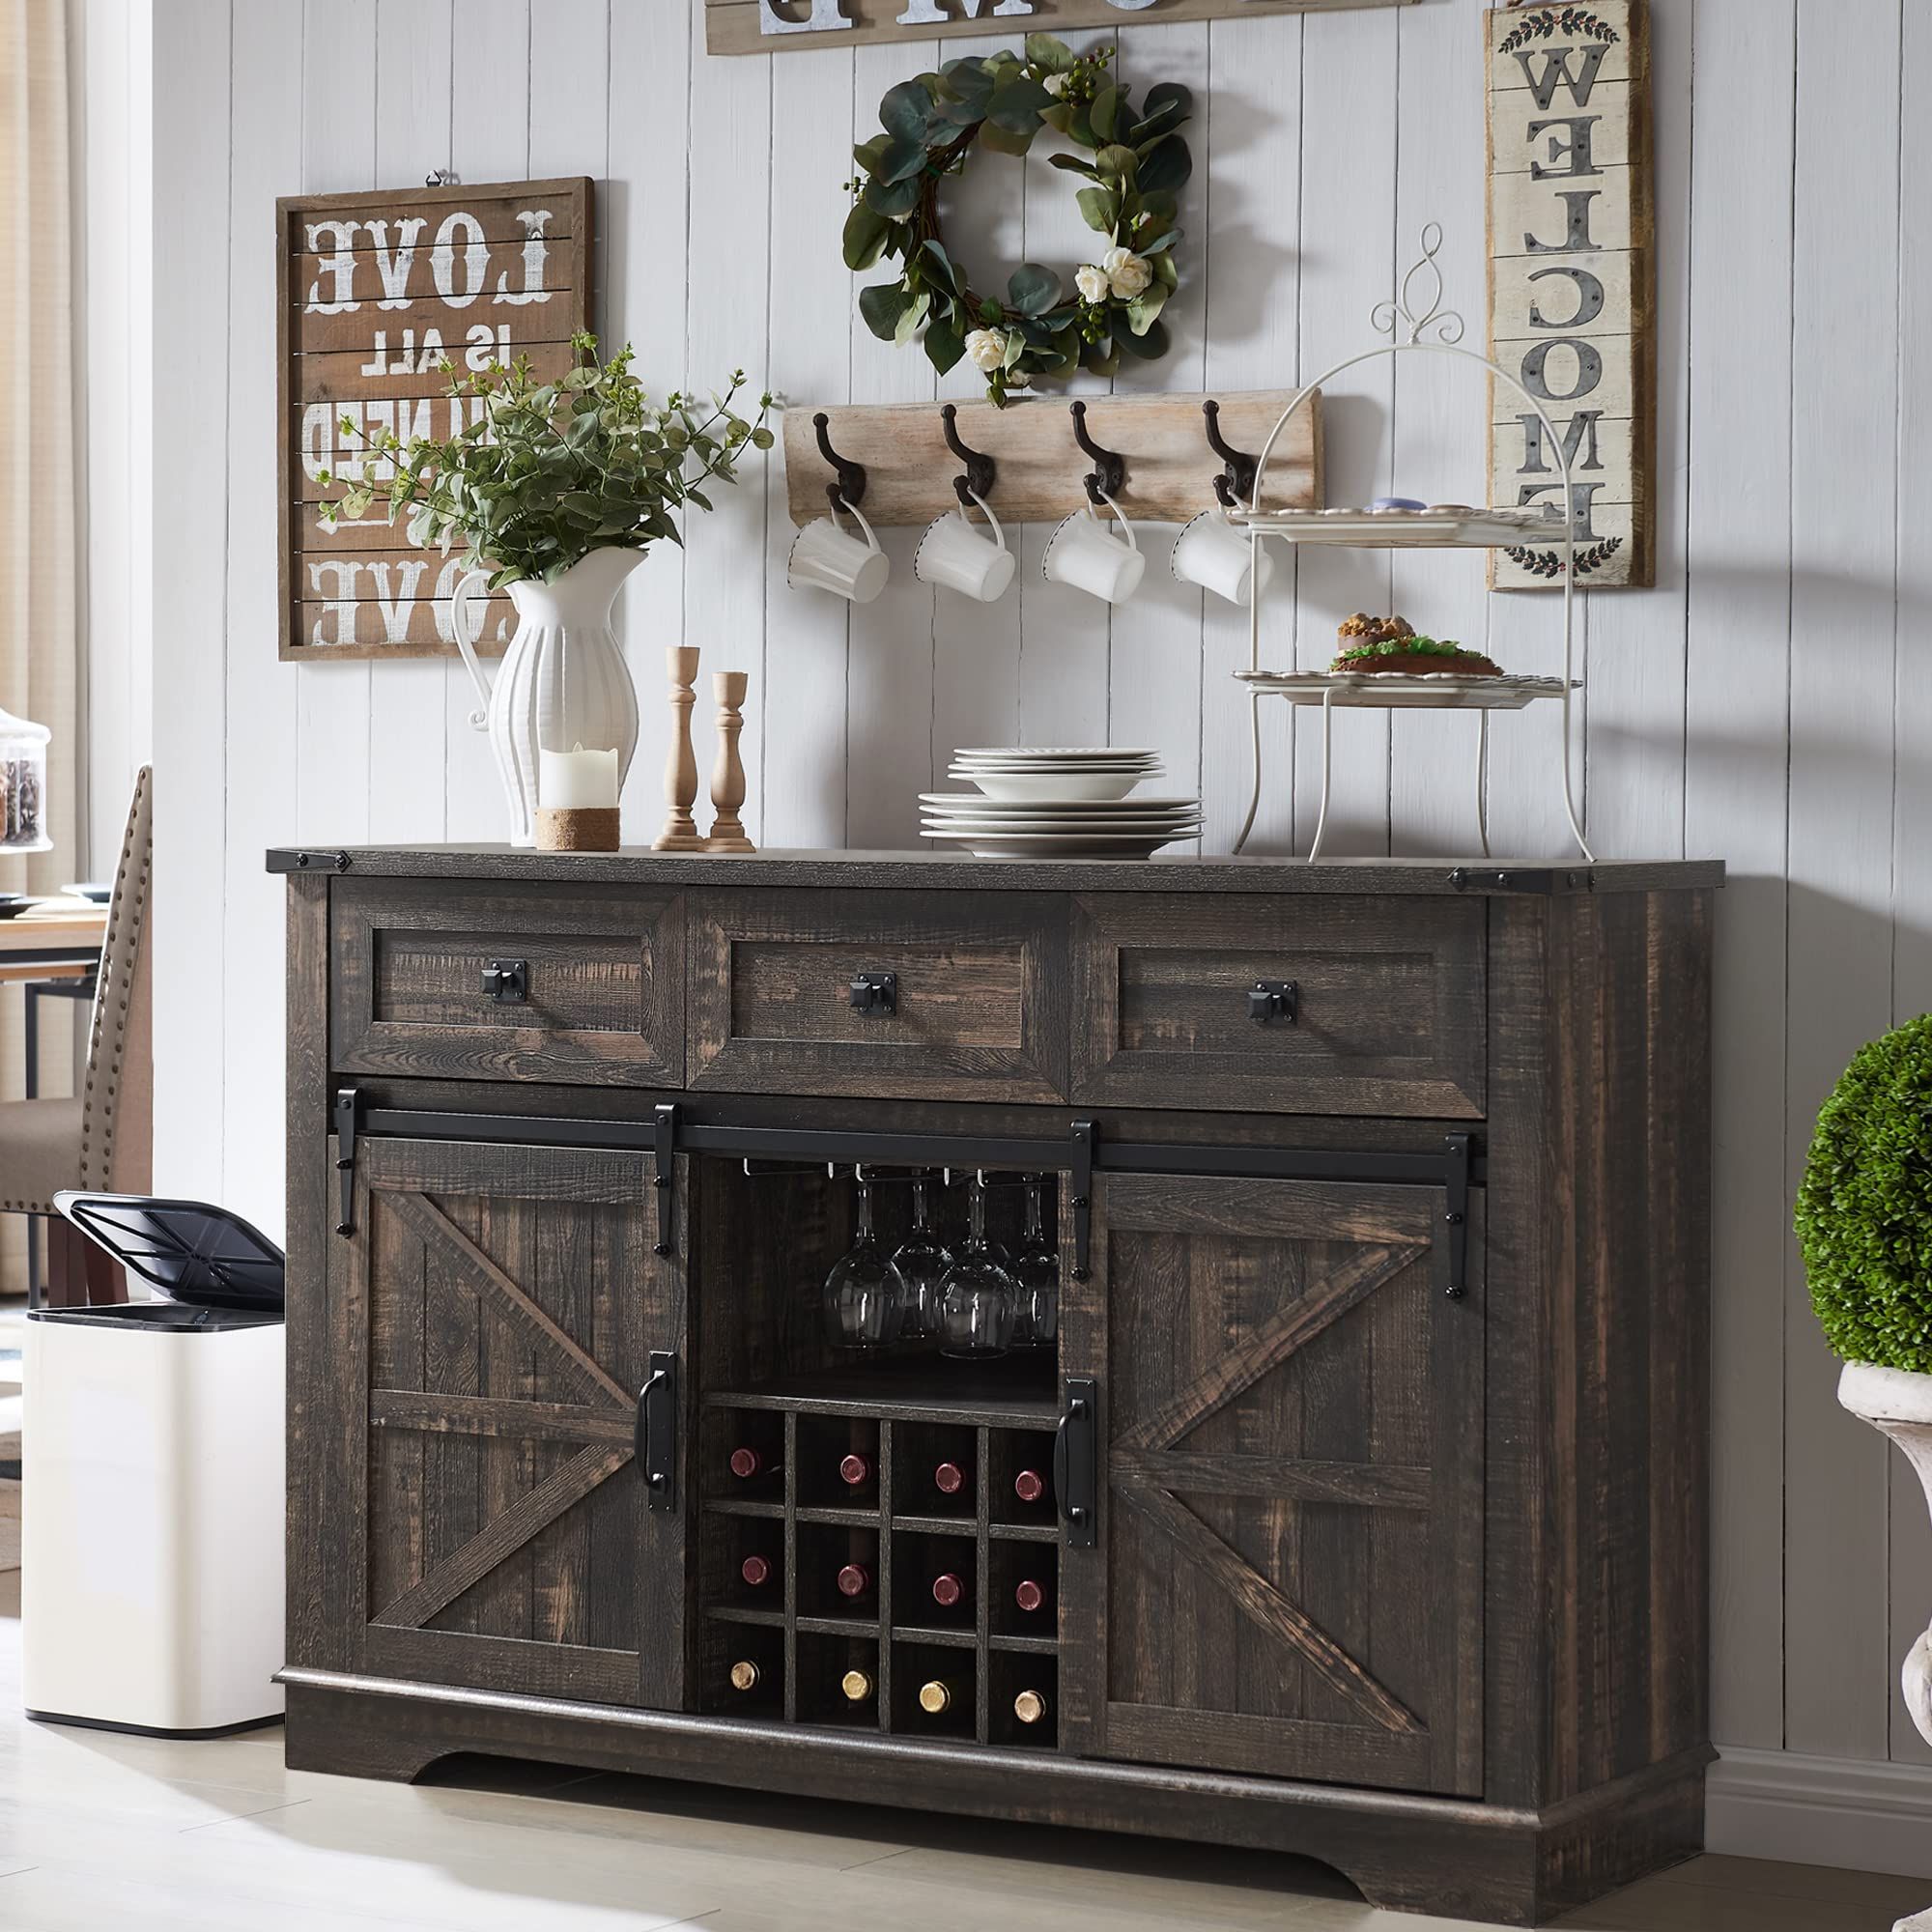 Trendy Sideboards Double Barn Door Buffet For Amazon: Okd Farmhouse Buffet Cabinet With Storage, 54" Sideboard With 3  Drawers, Sliding Barn Door, Wine And Glass Rack, Storage Shelves, Liquor  Coffee Bar Cupboard For Kitchen, Dining Room, Dark Rustic Oak : (Photo 2 of 10)